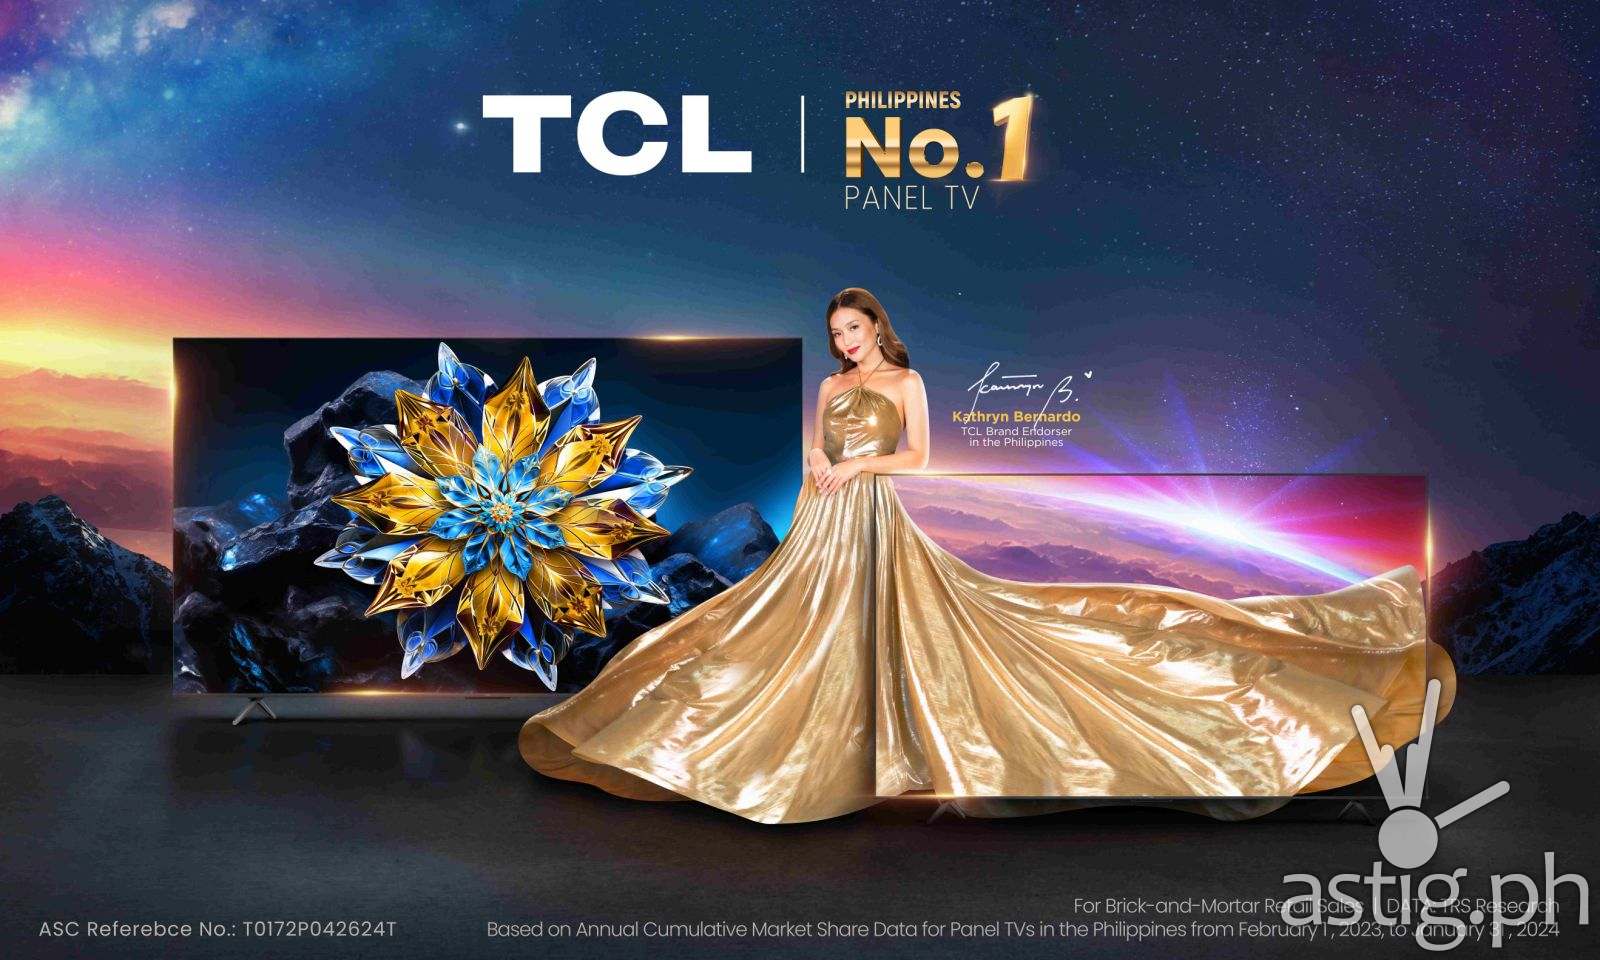 TCL is #1 Panel TV Brand in PH